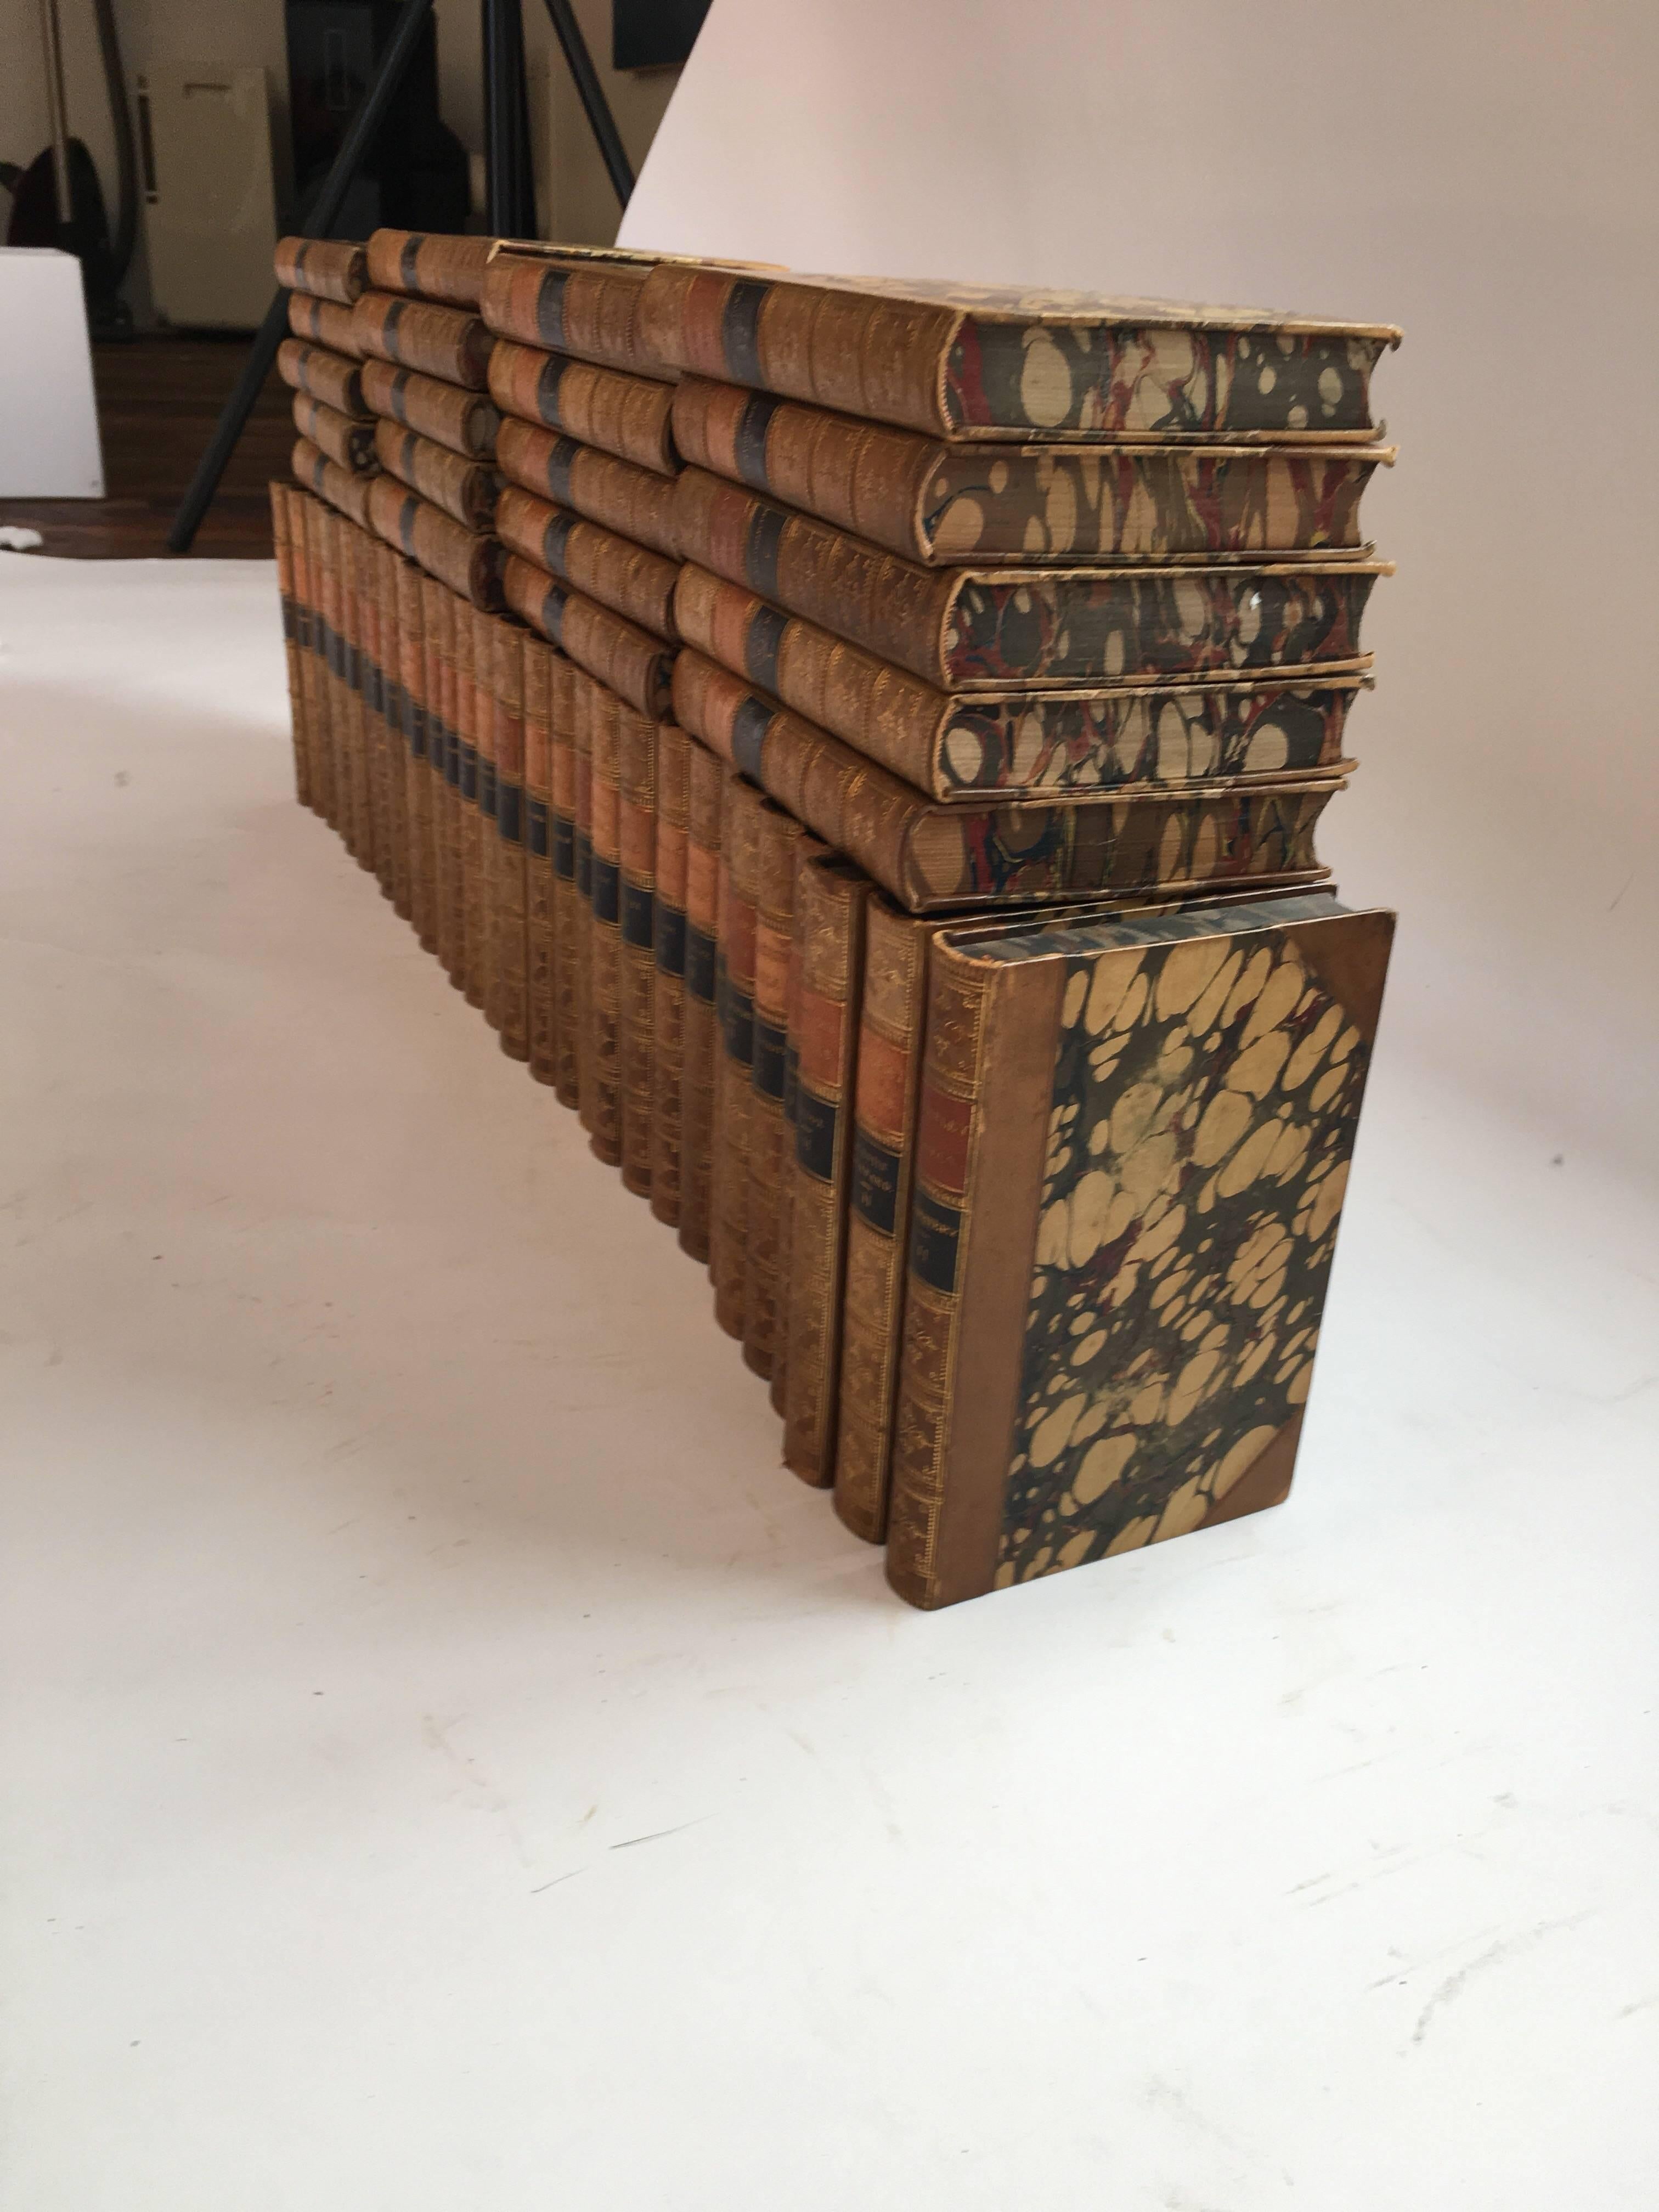 Excellent and complete set of 50 Volumes of The Waverley Novels by Sir Walter Scott.

Boston: Ticknor and Fields, 1857; The Household Edition. Finely bound in half leather with marbled paper covered boards. All edges are marbled to match. Heavily